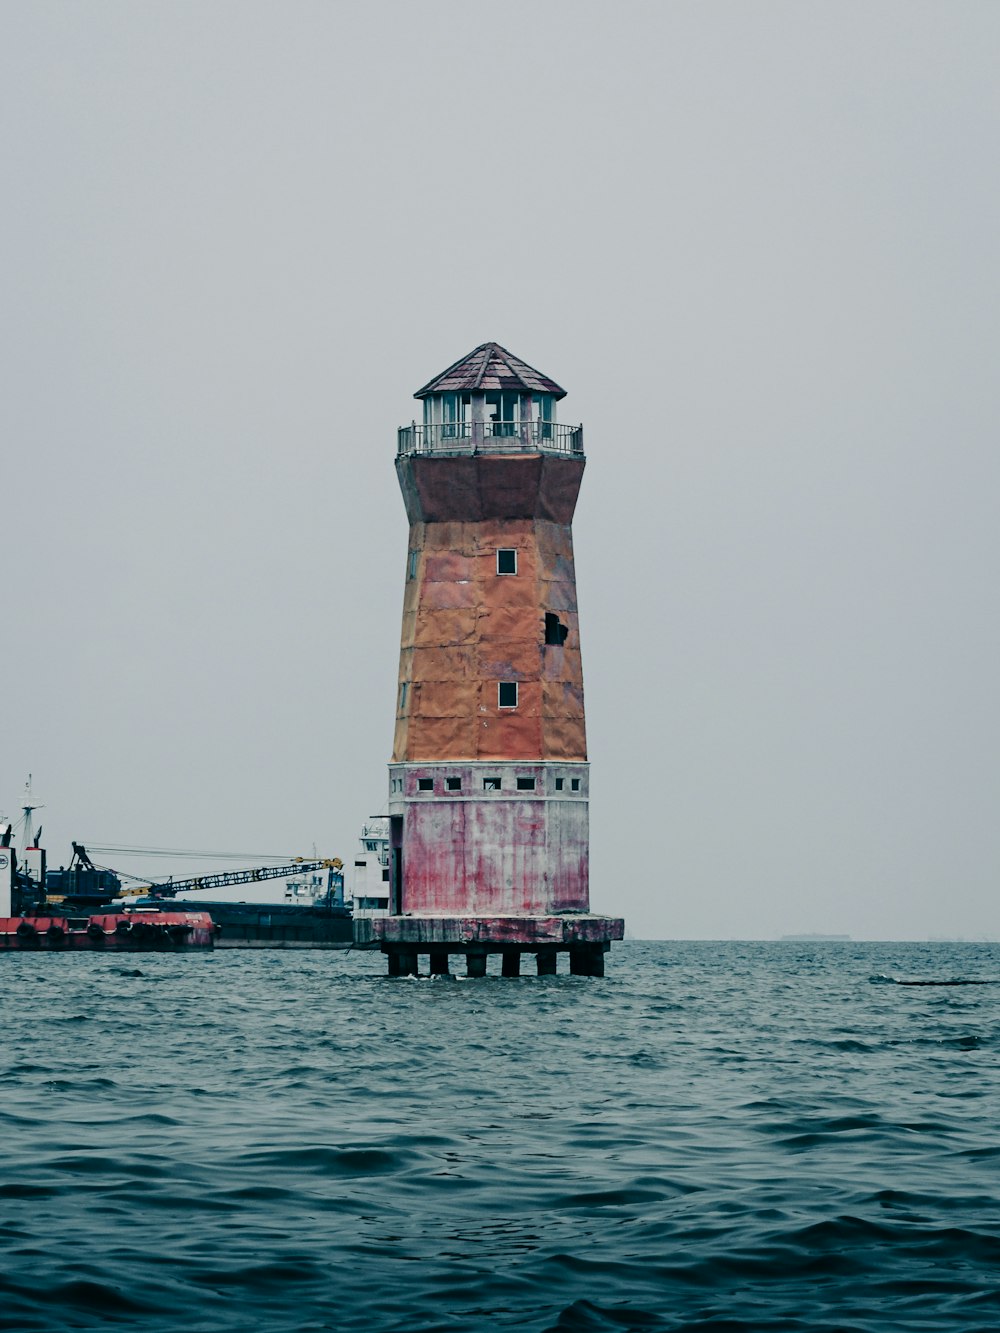 a lighthouse in the middle of the ocean